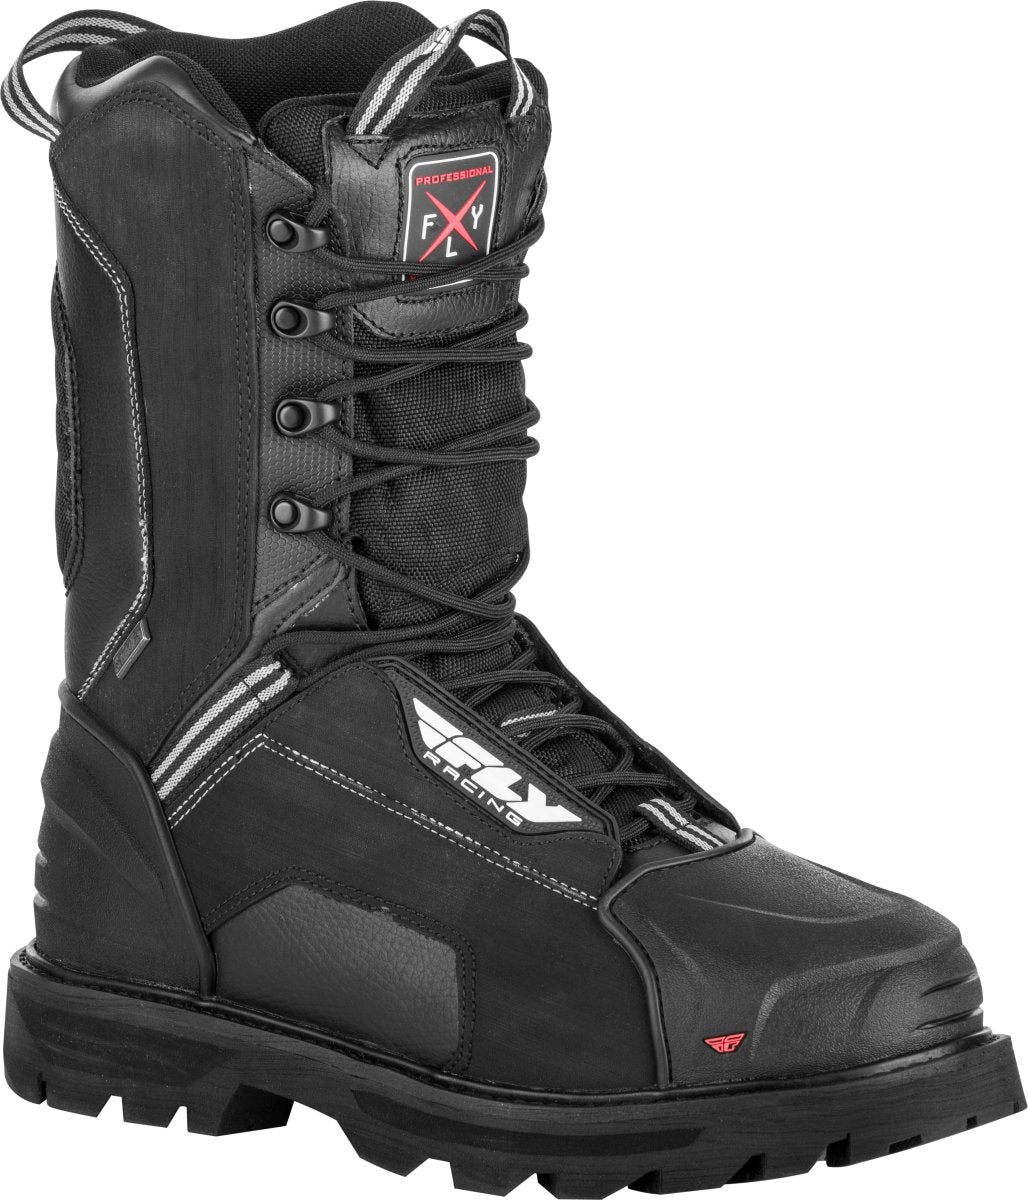 FLY RACING - BOULDER BOOTS - 361-94007 - 191361045745